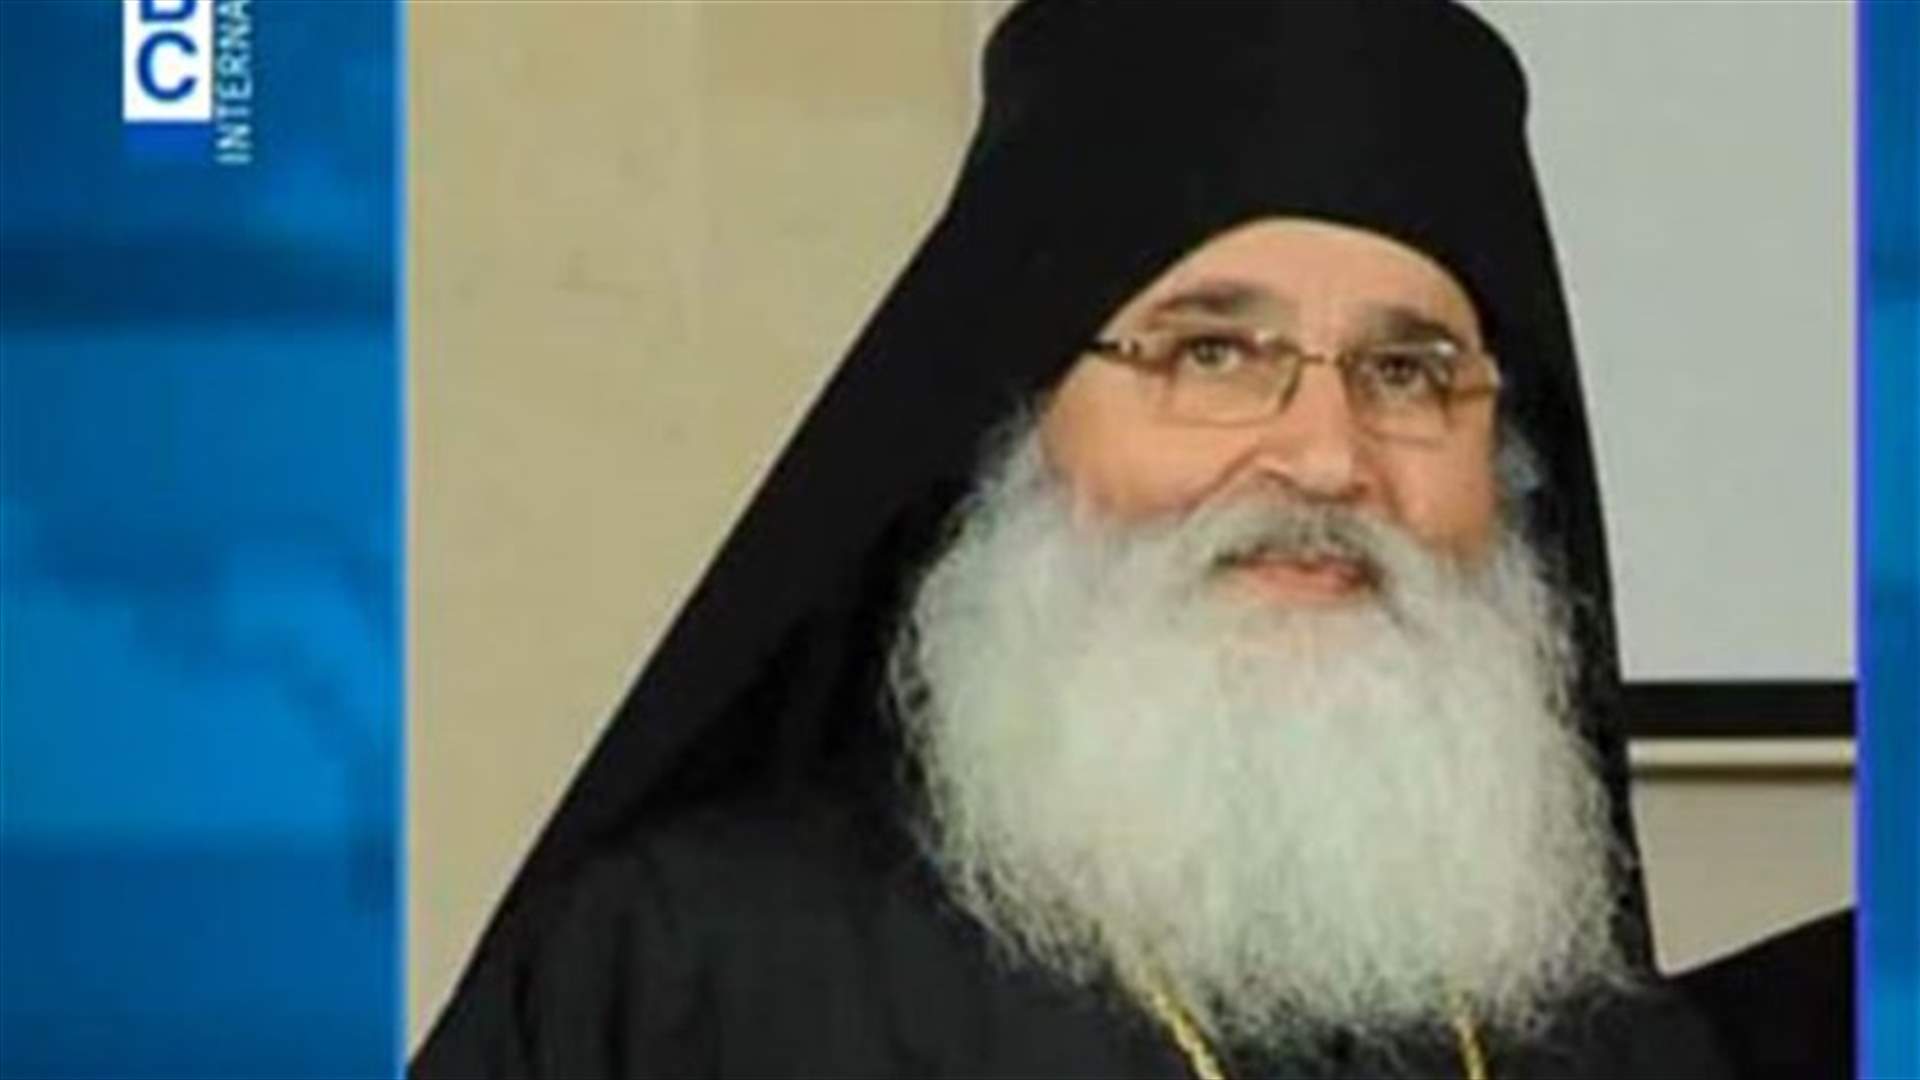 REPORT: Father Panteleimon Farah banned from exercising his ecclesiastical duties